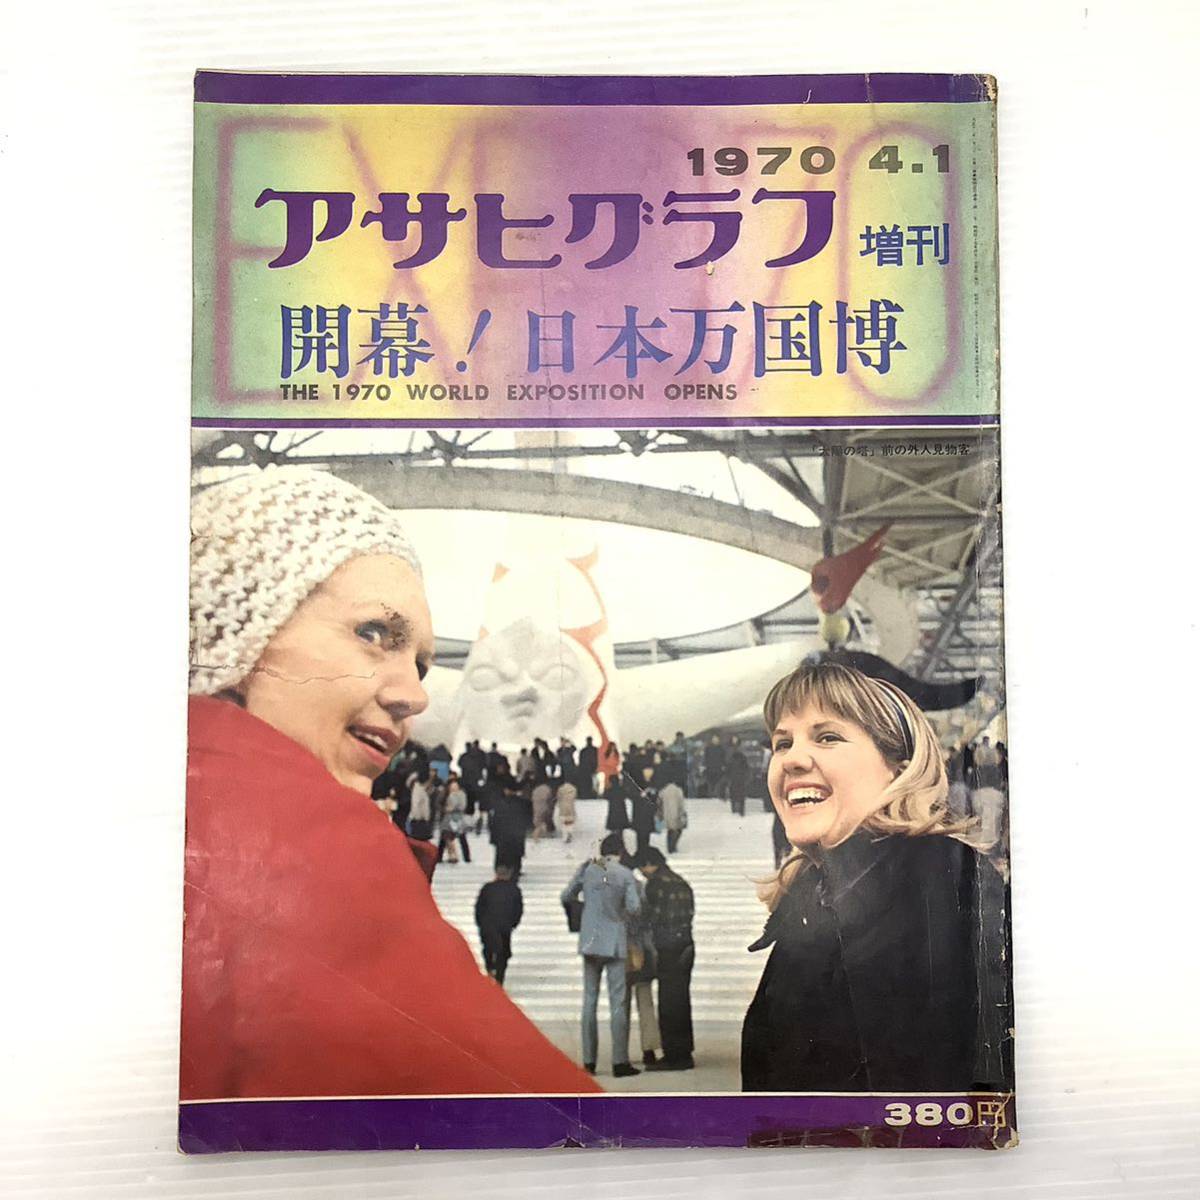  morning day newspaper company Asahi Graph increase . number Japan ten thousand .EXPO \'70 1970 year Showa era 45 year 4 month 1 day issue secondhand book magazine Showa Retro that time thing Space Age 